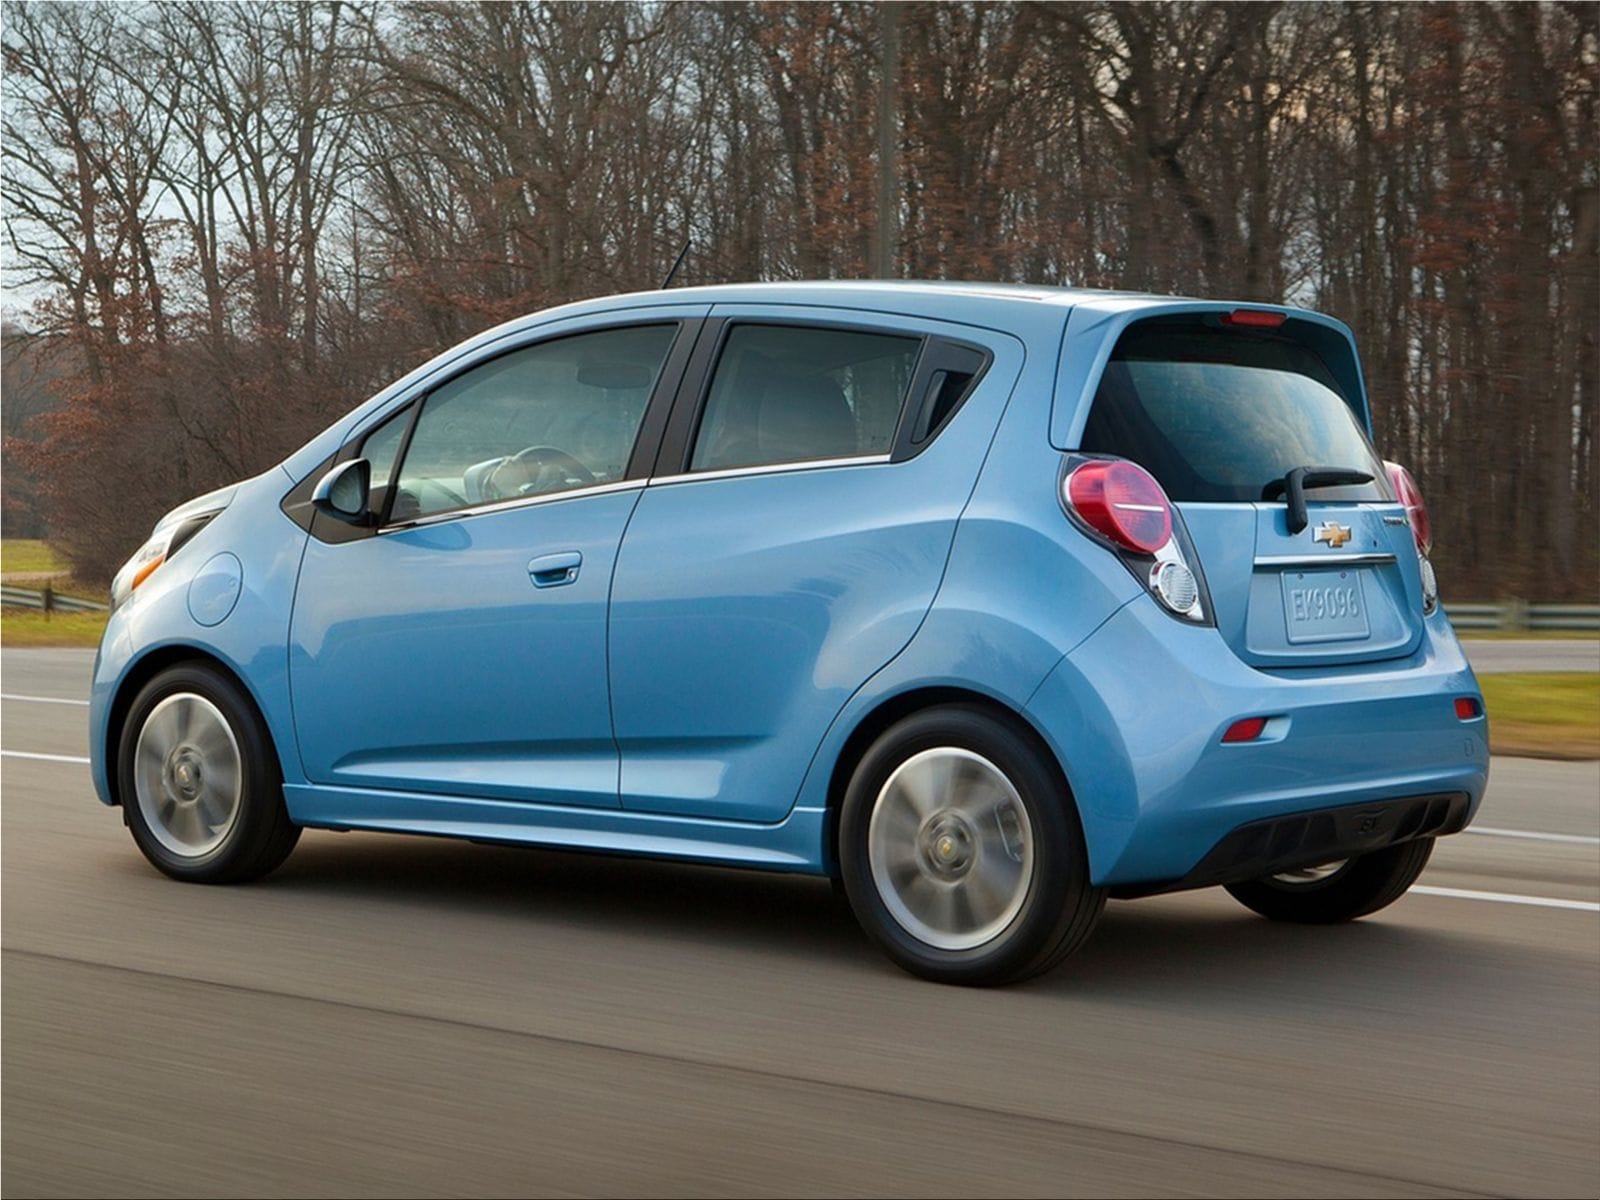 first-official-pictures-of-chevrolet-spark-ev-chevrolet